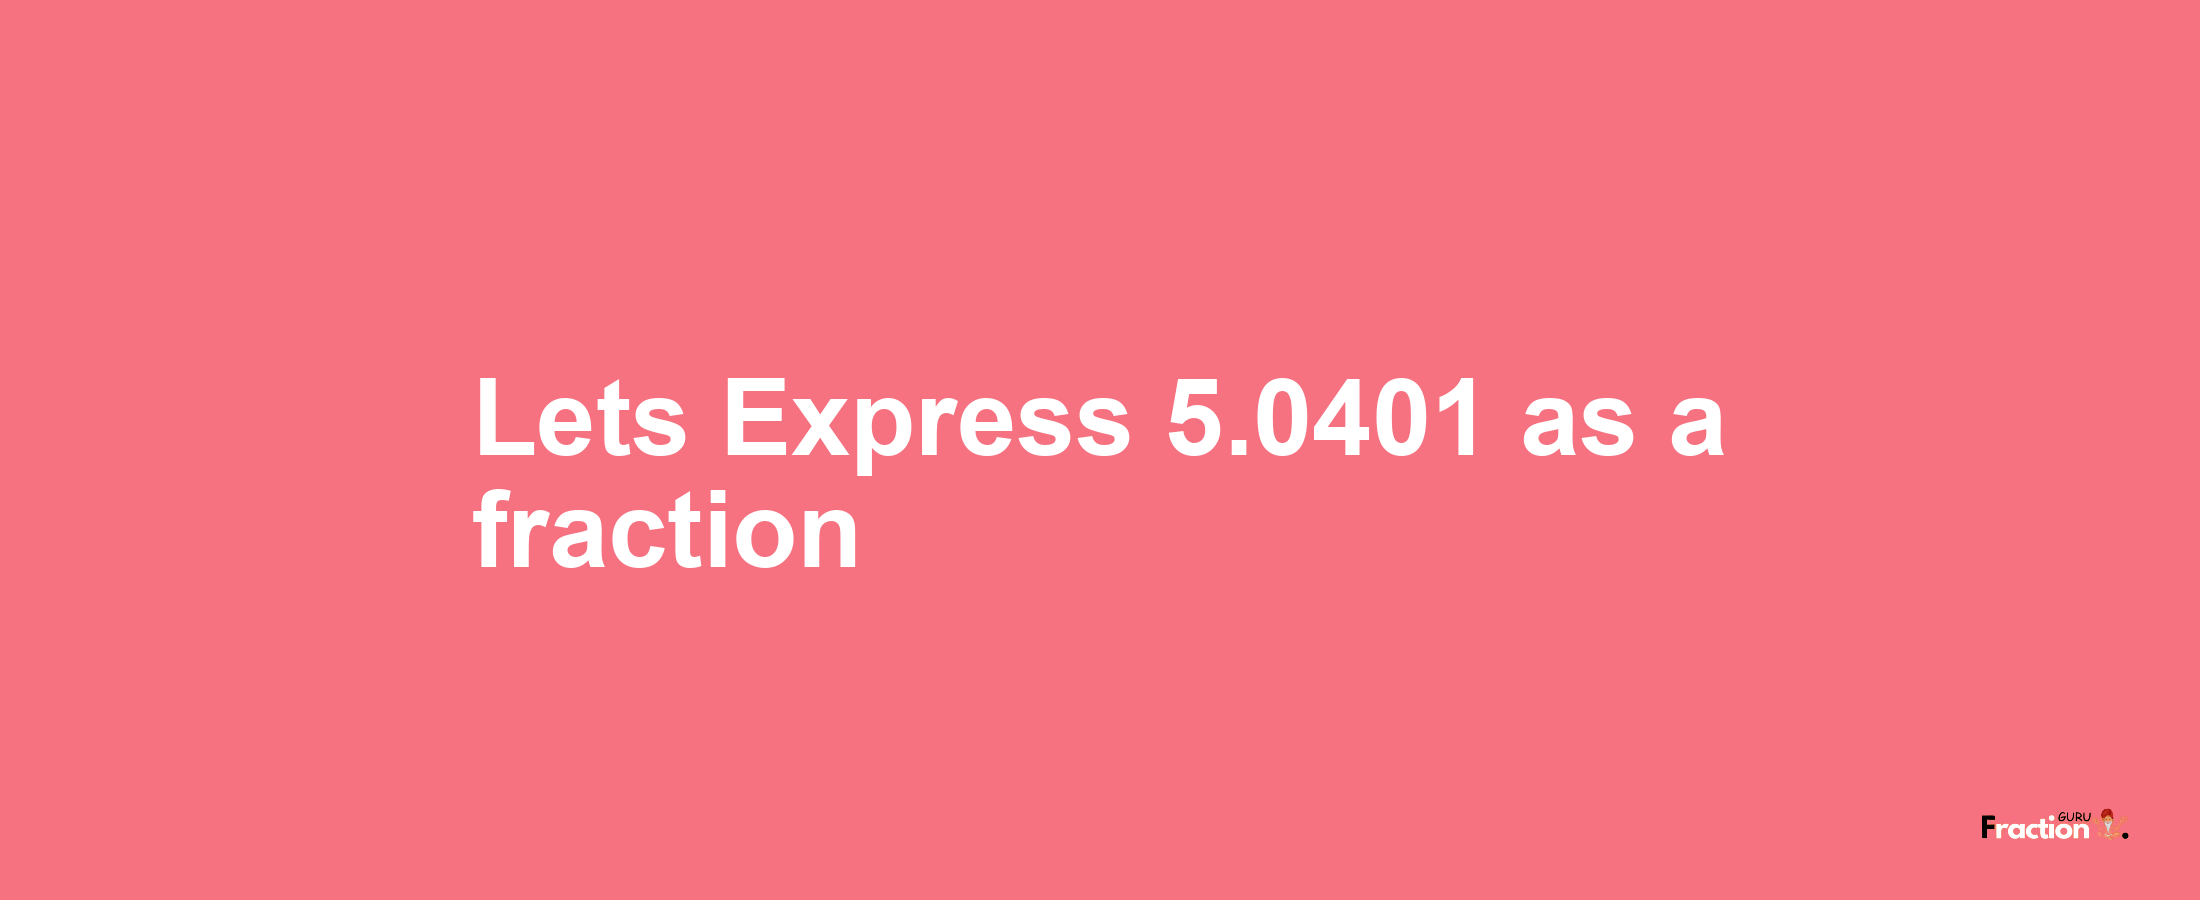 Lets Express 5.0401 as afraction